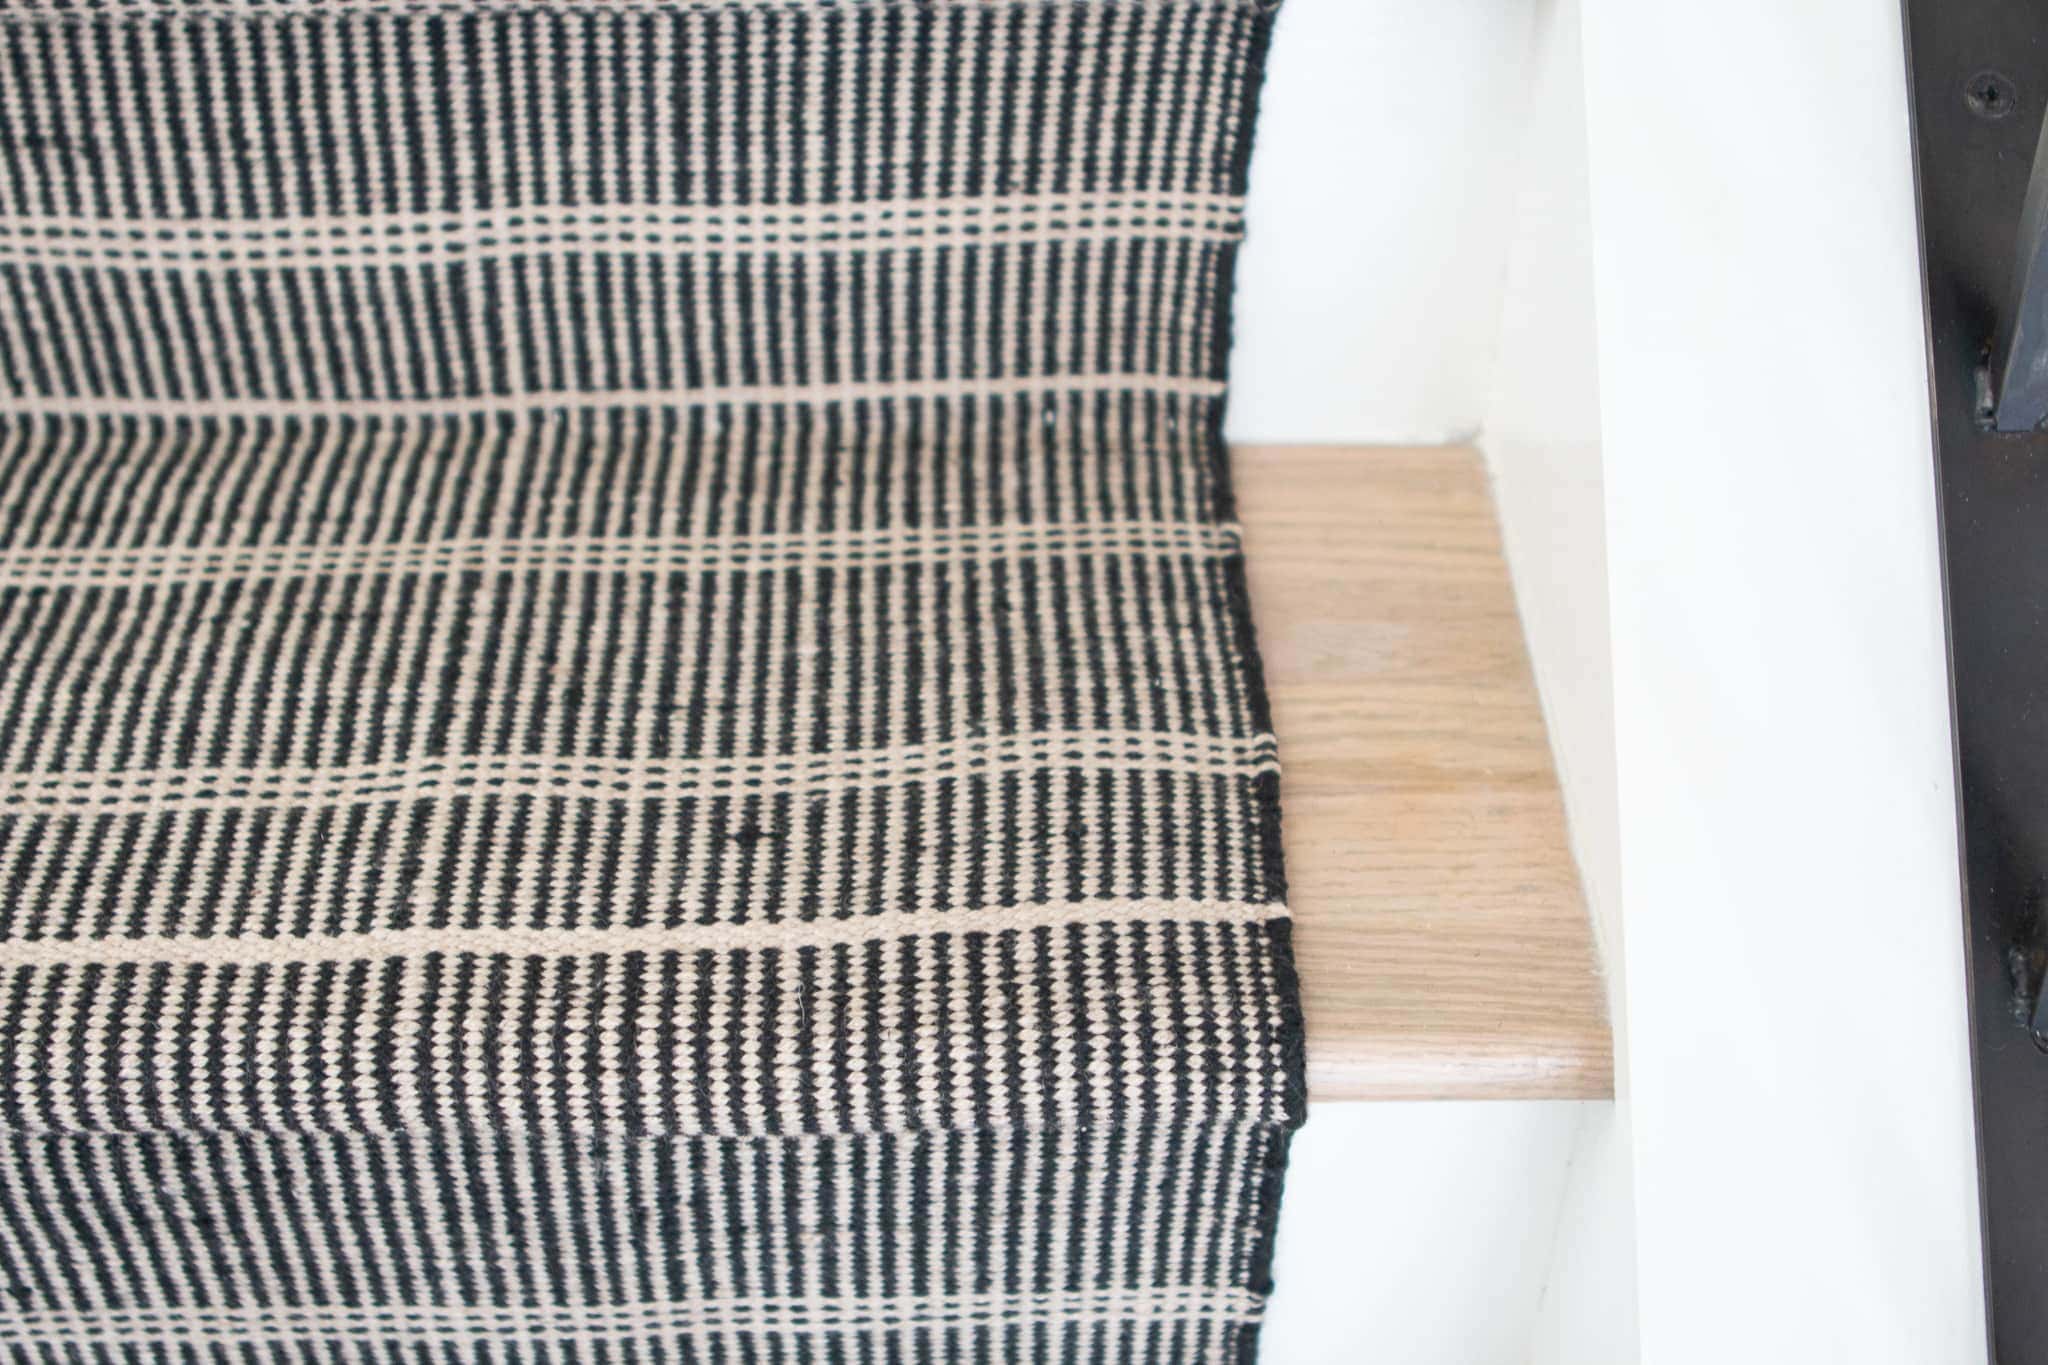 Fabric on the stair runners